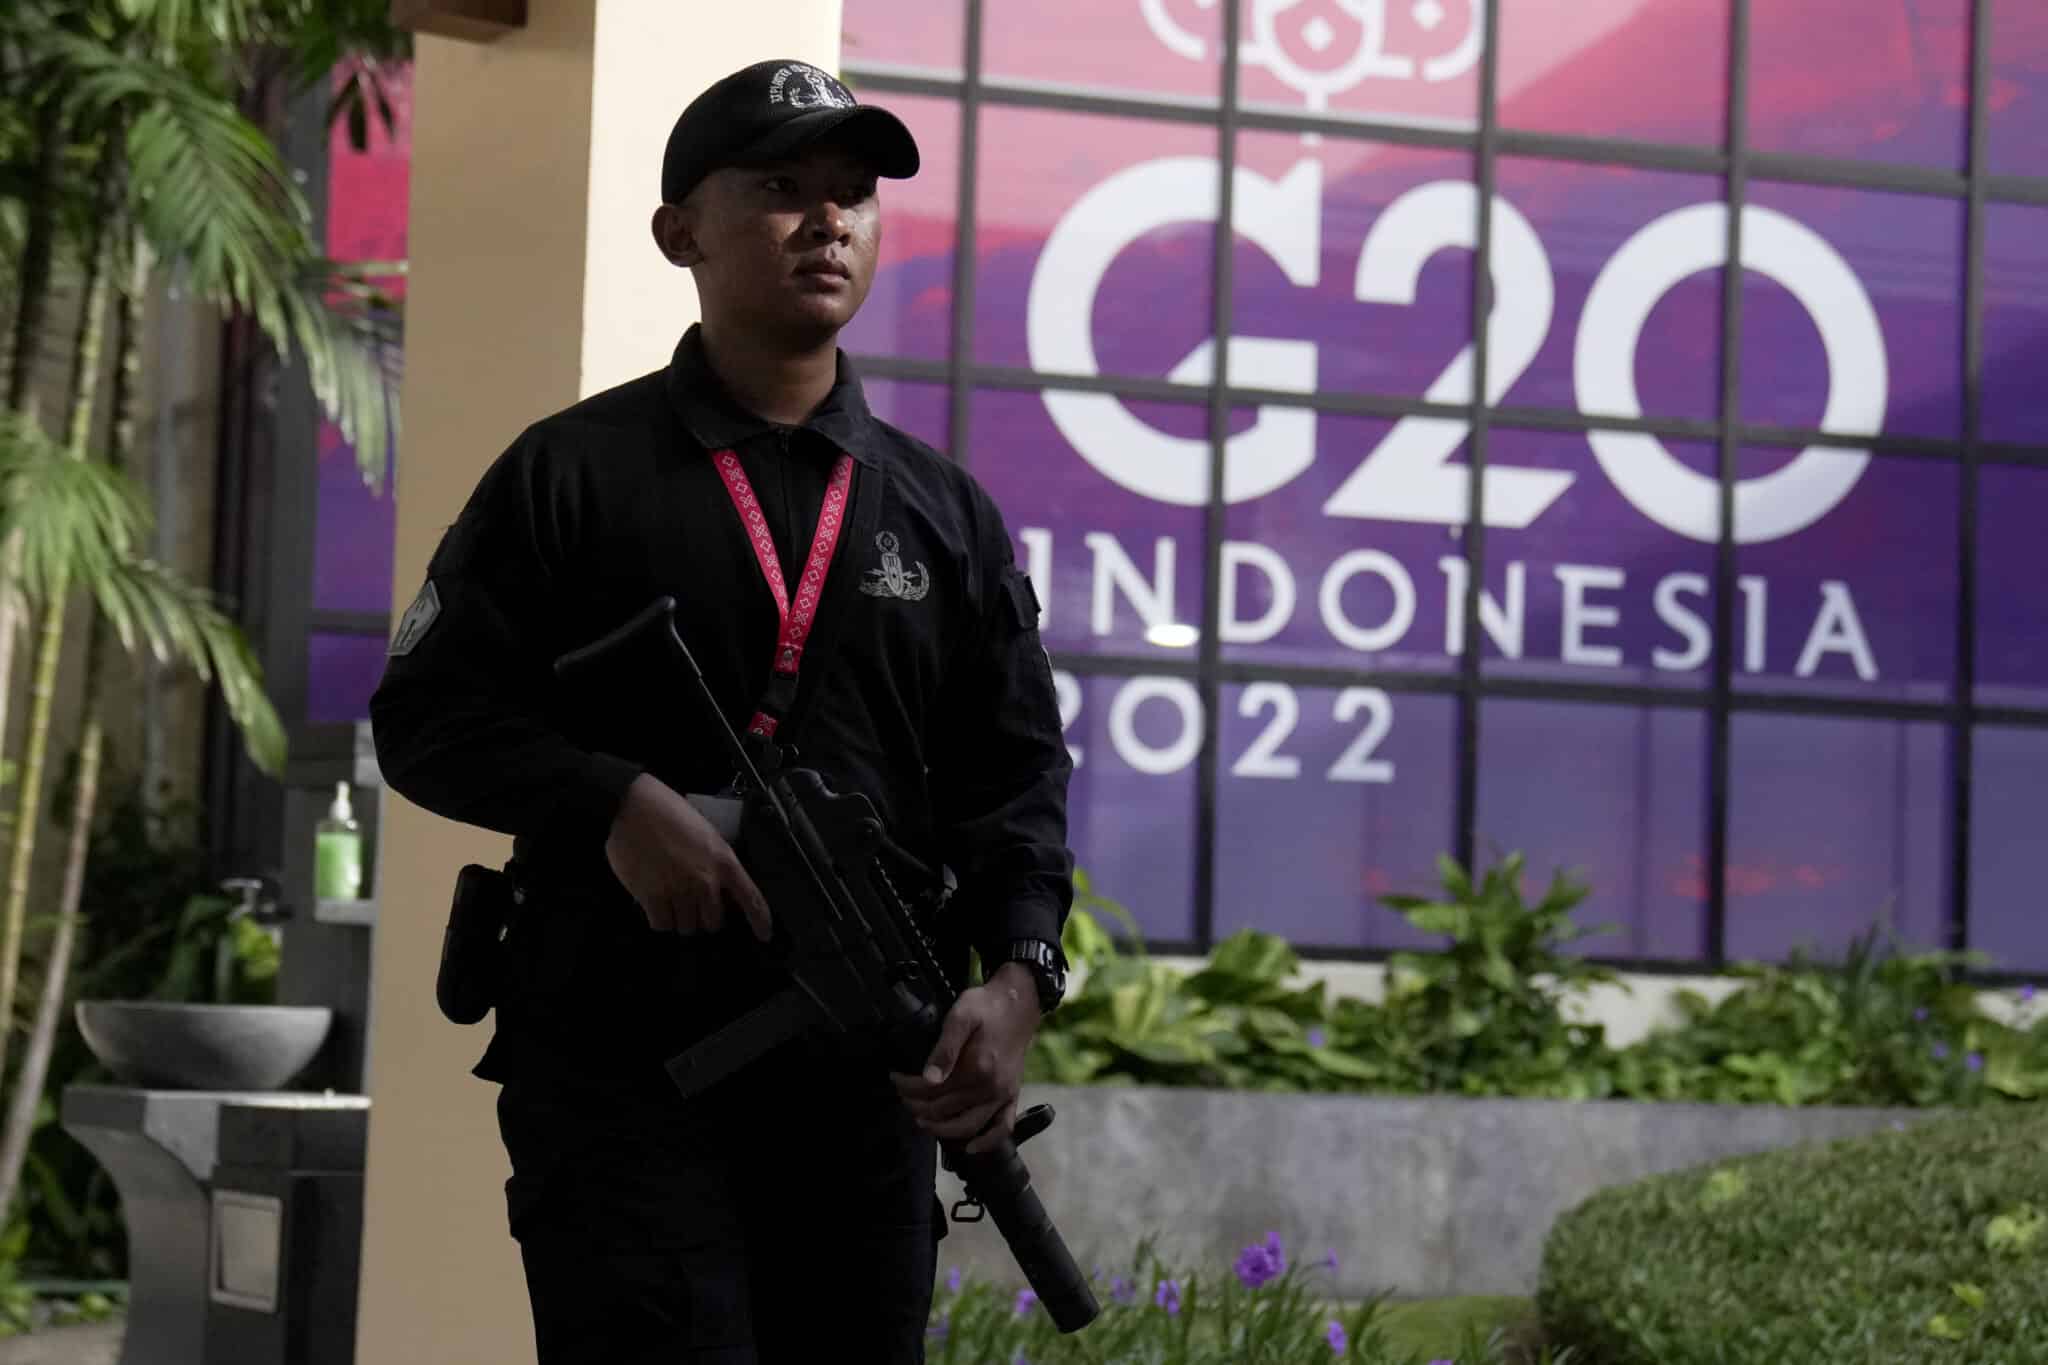 FILE - An Indonesian soldier walks past a G20 sign at one of the venues of the G20 leaders summit, in Nusa Dua, Bali, Indonesia, on Nov. 14, 2022. President Biden and other leaders of the Group of 20 leading economies will meet in Bali, a tropical island in Indonesia, this week. The gathering is the first G-20 summit since before the pandemic to include face-to-face talks between the leaders.  (AP Photo/Dita Alangkara, File)